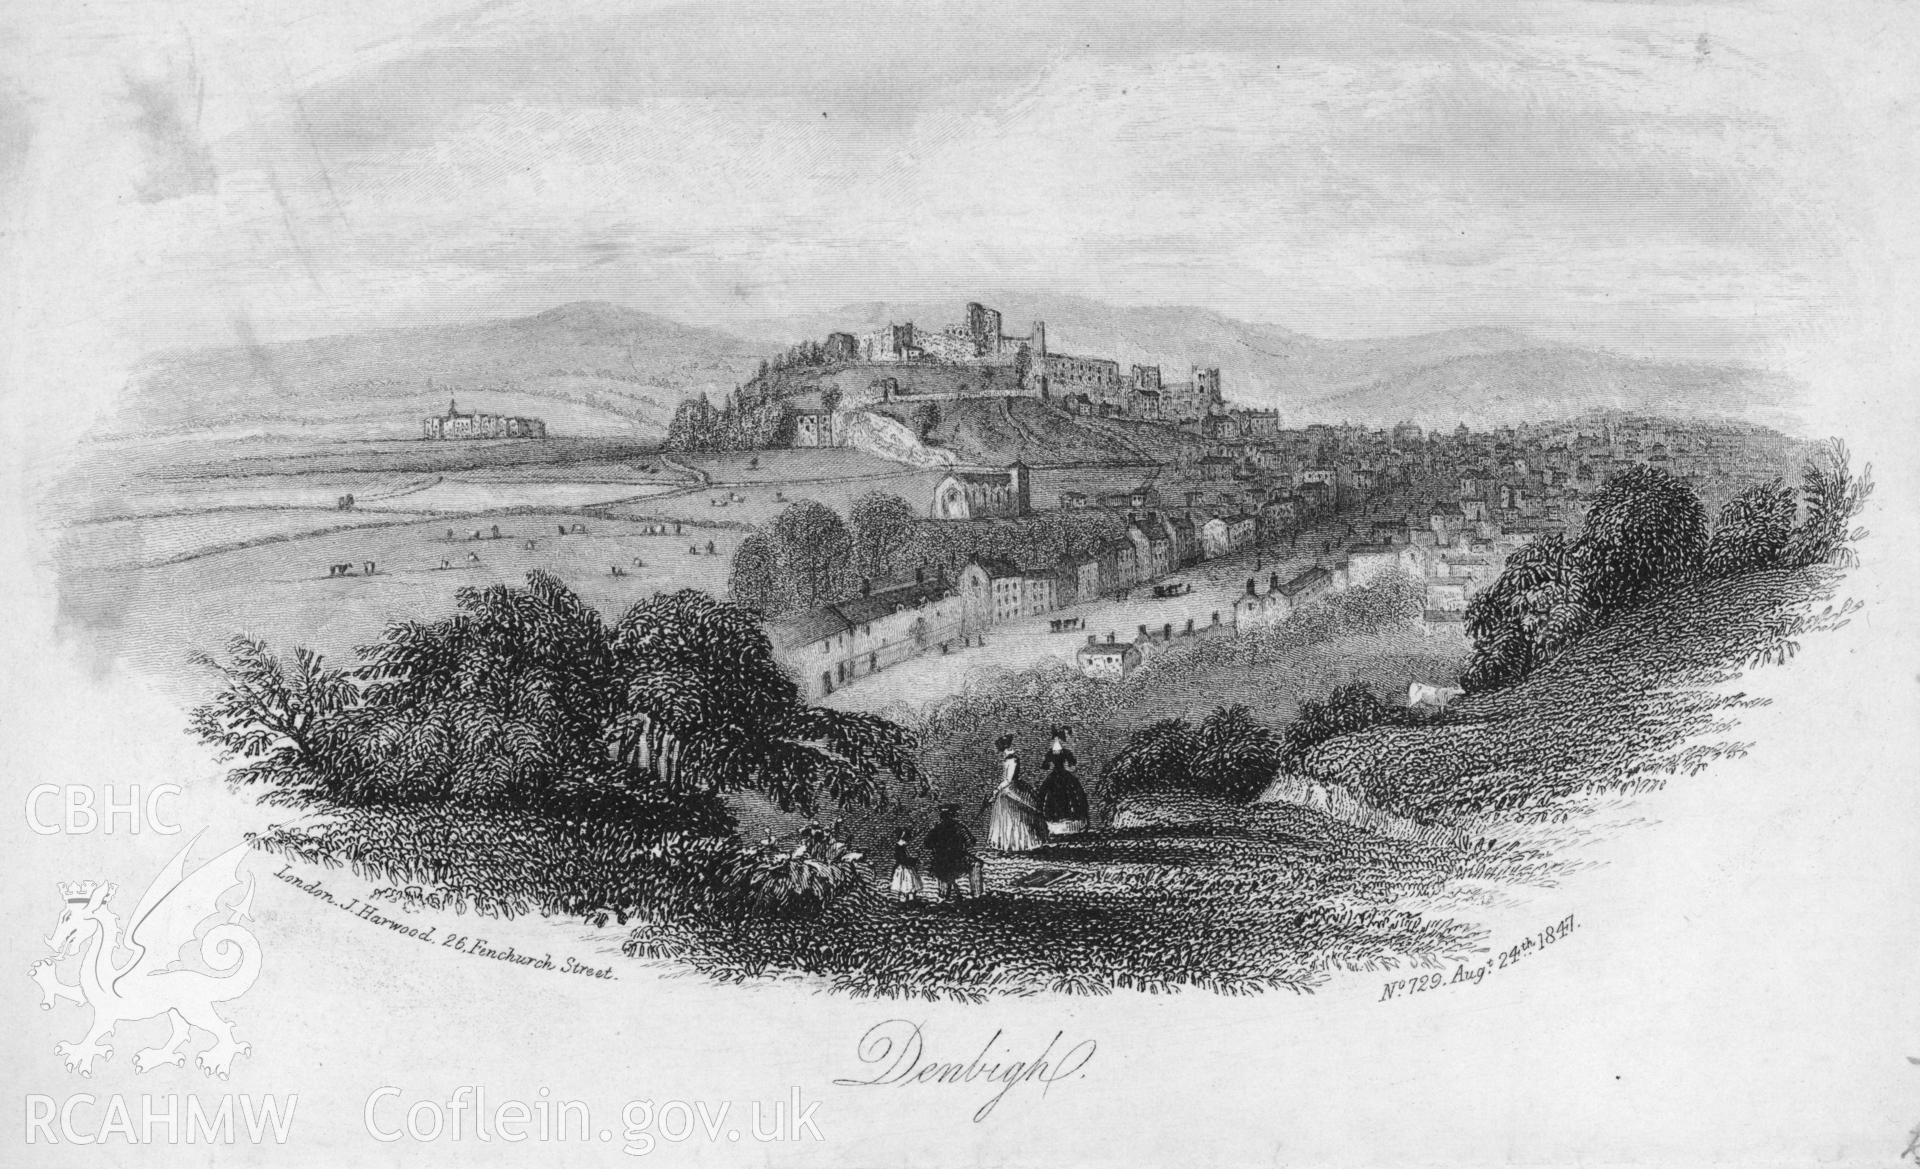 Black and white illustration of Denbigh Town taken from an engraving.